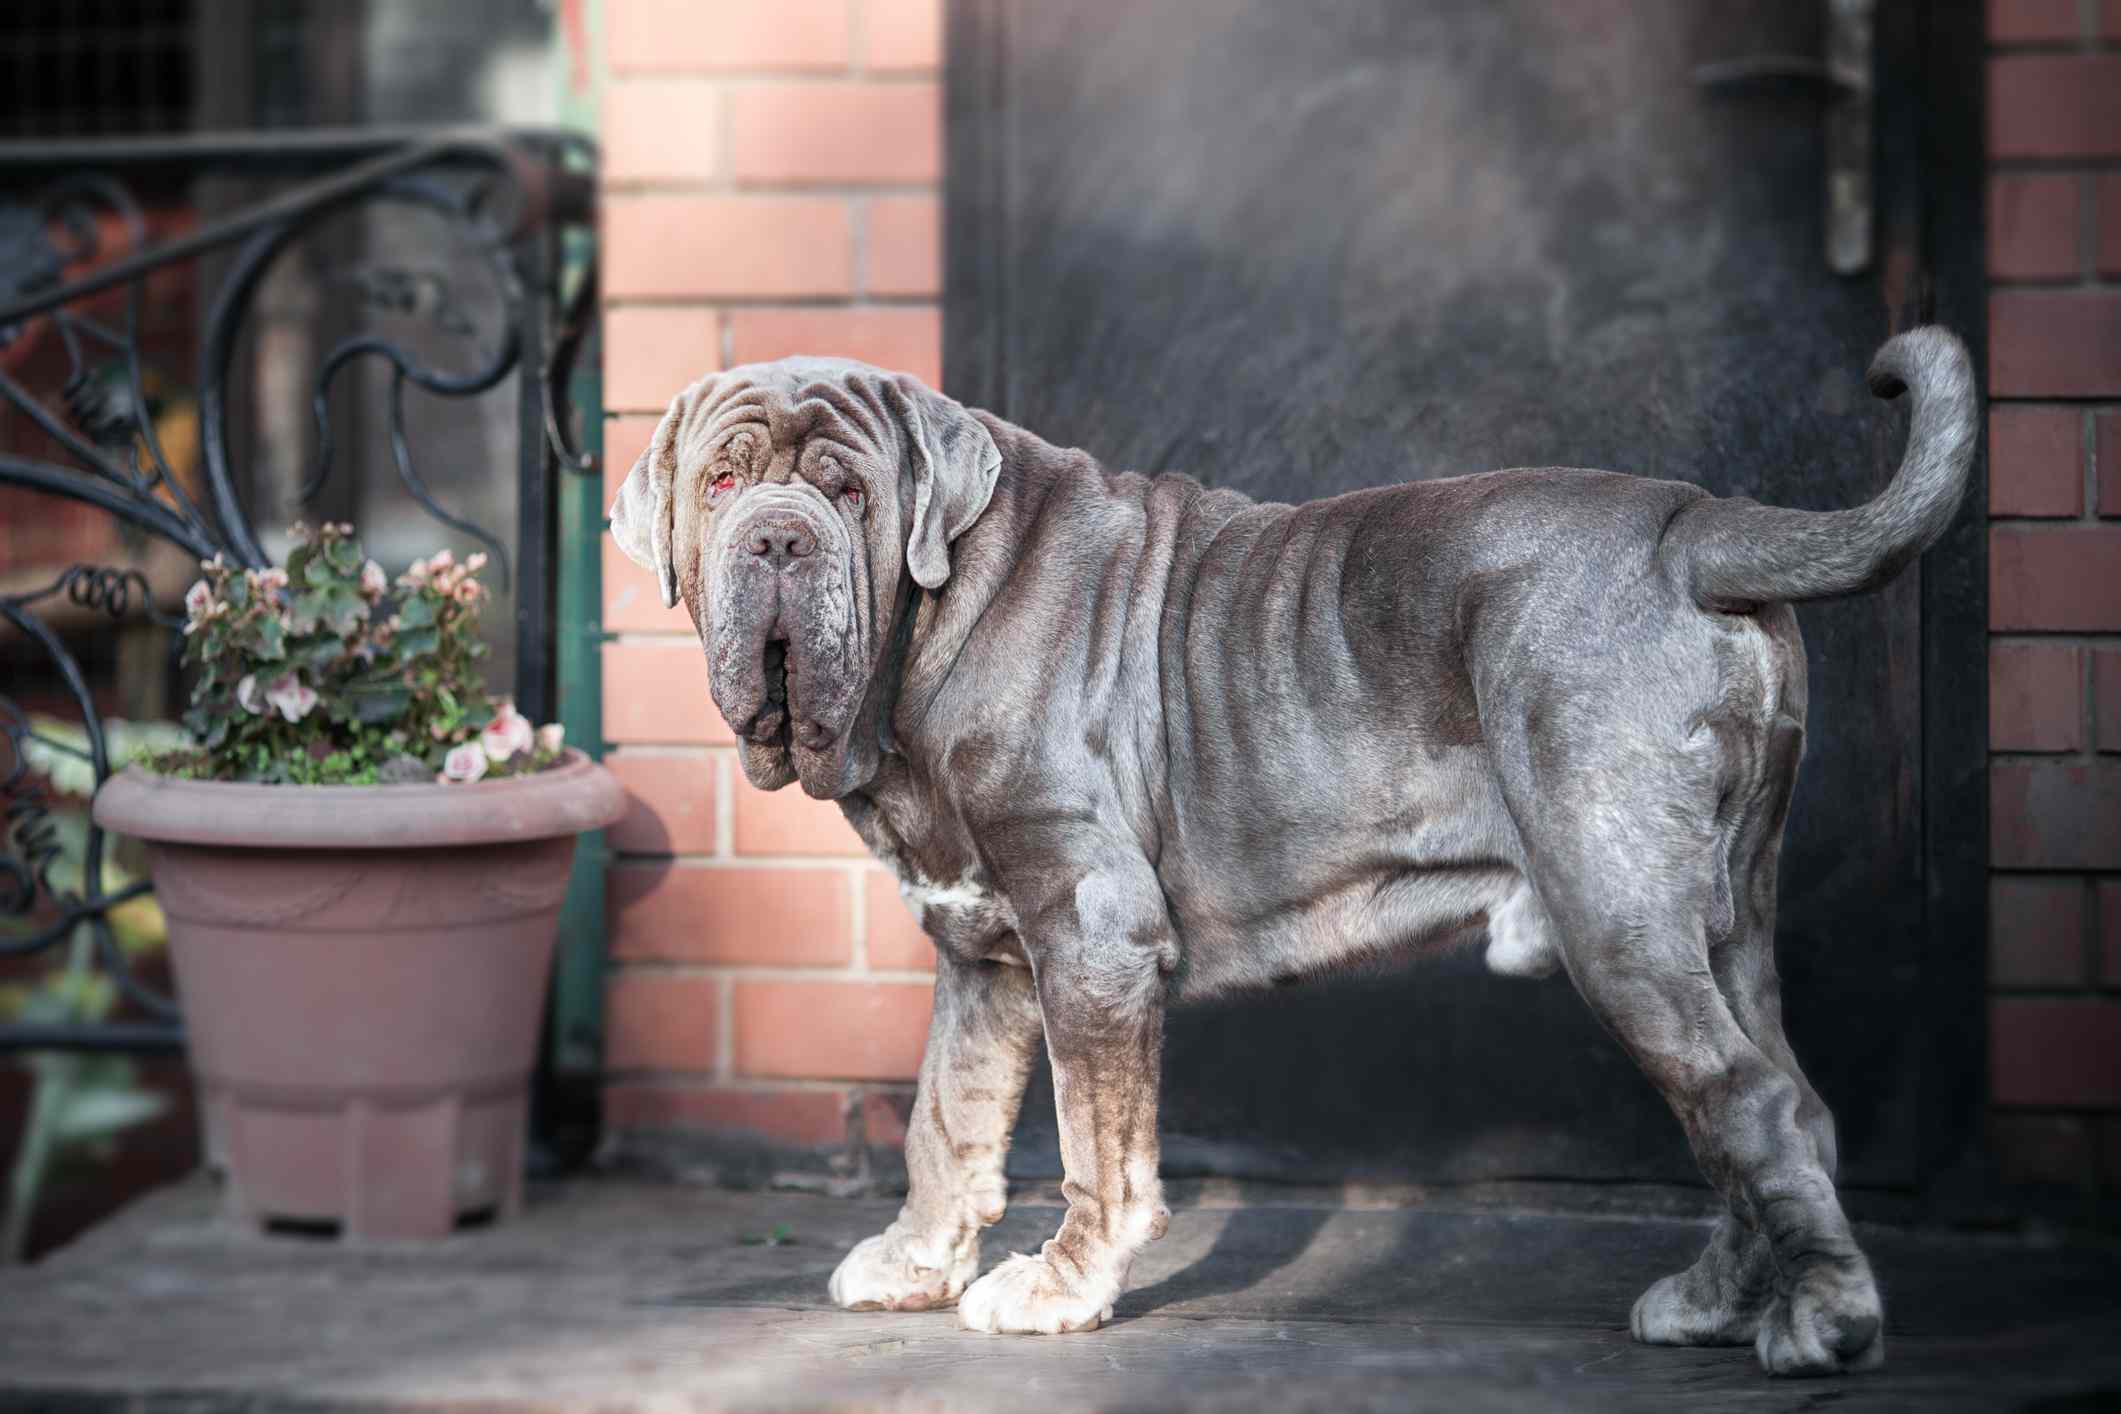 A large grey Neaopolitan Mastiff dog walking in the street turning to look at the camera.